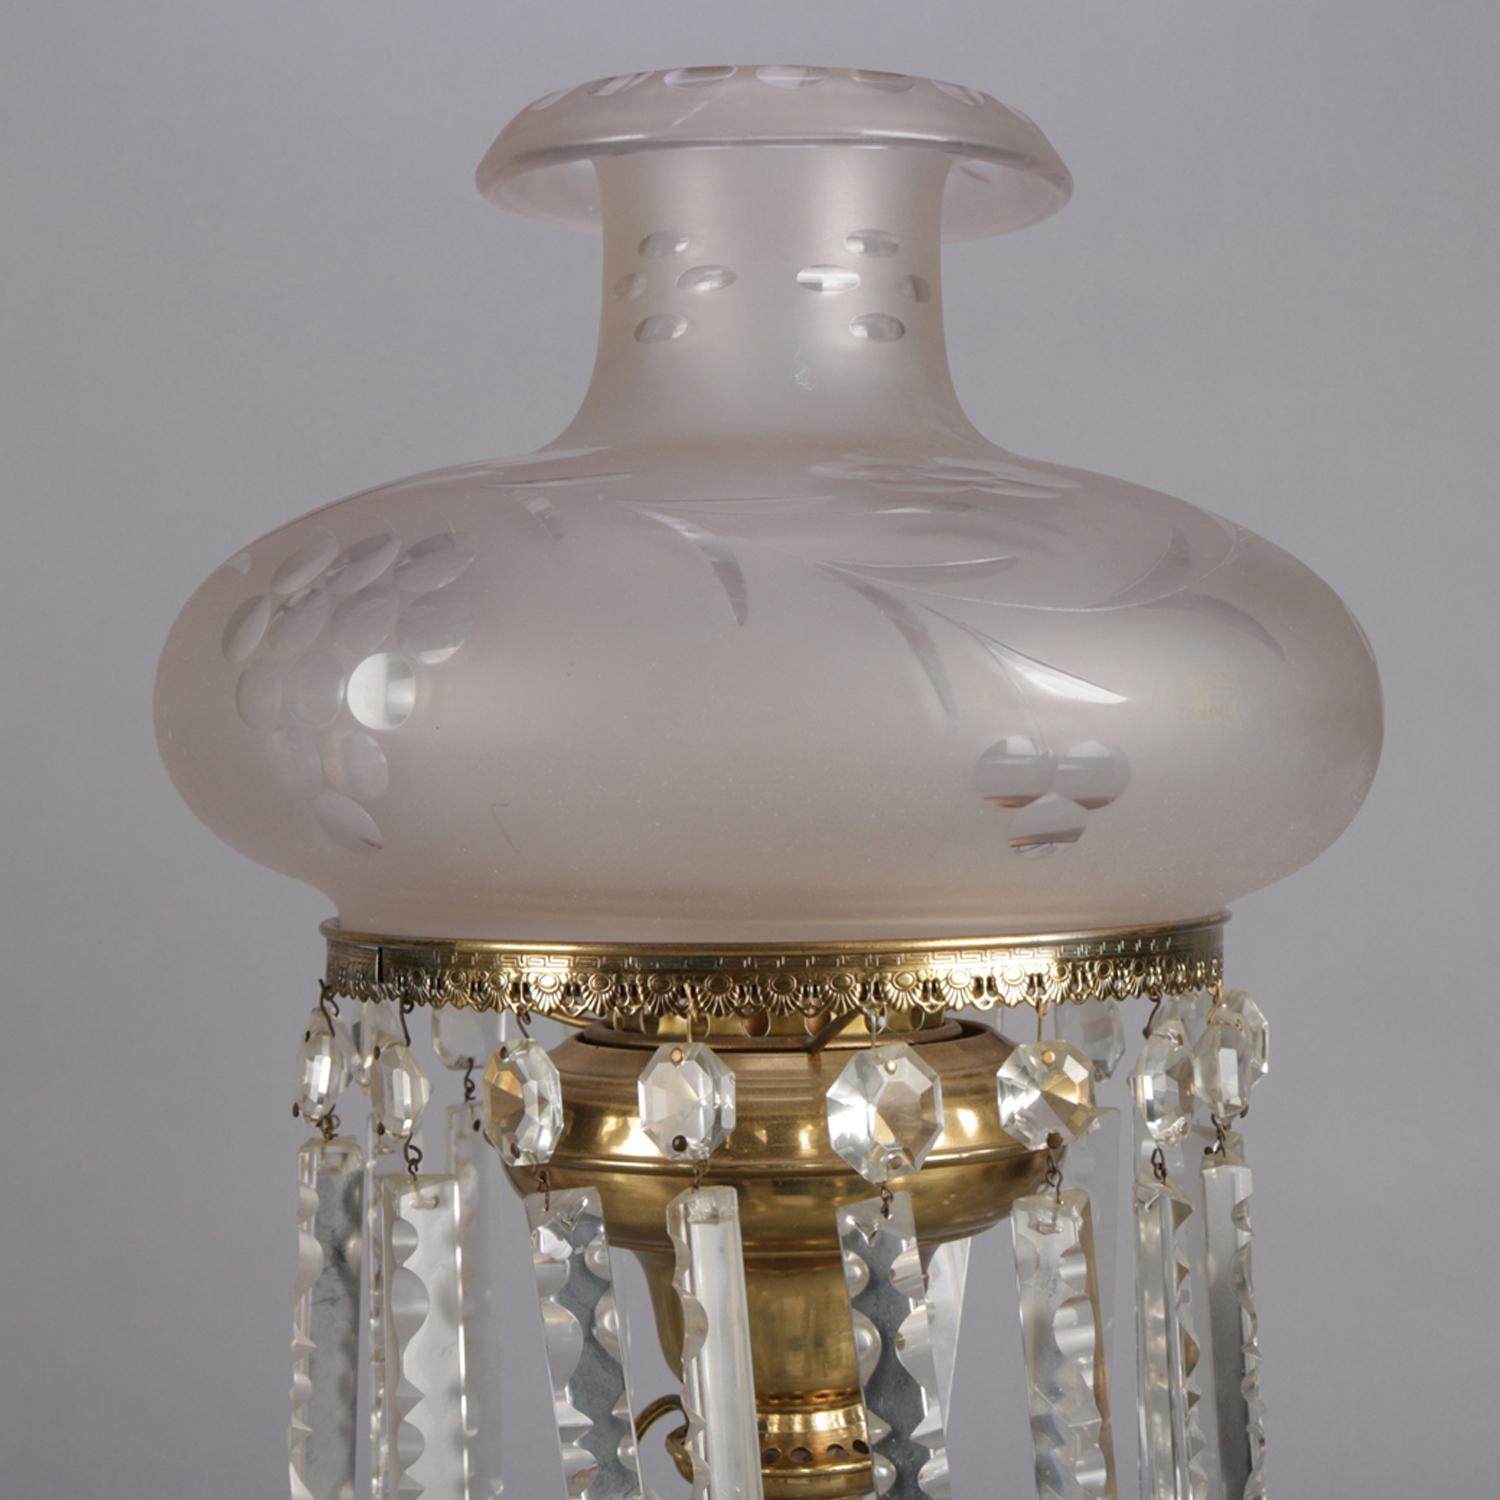 American Antique Crystal & Brass J.G. Webb Electrified Solar Lamp with Prisms, circa 1840